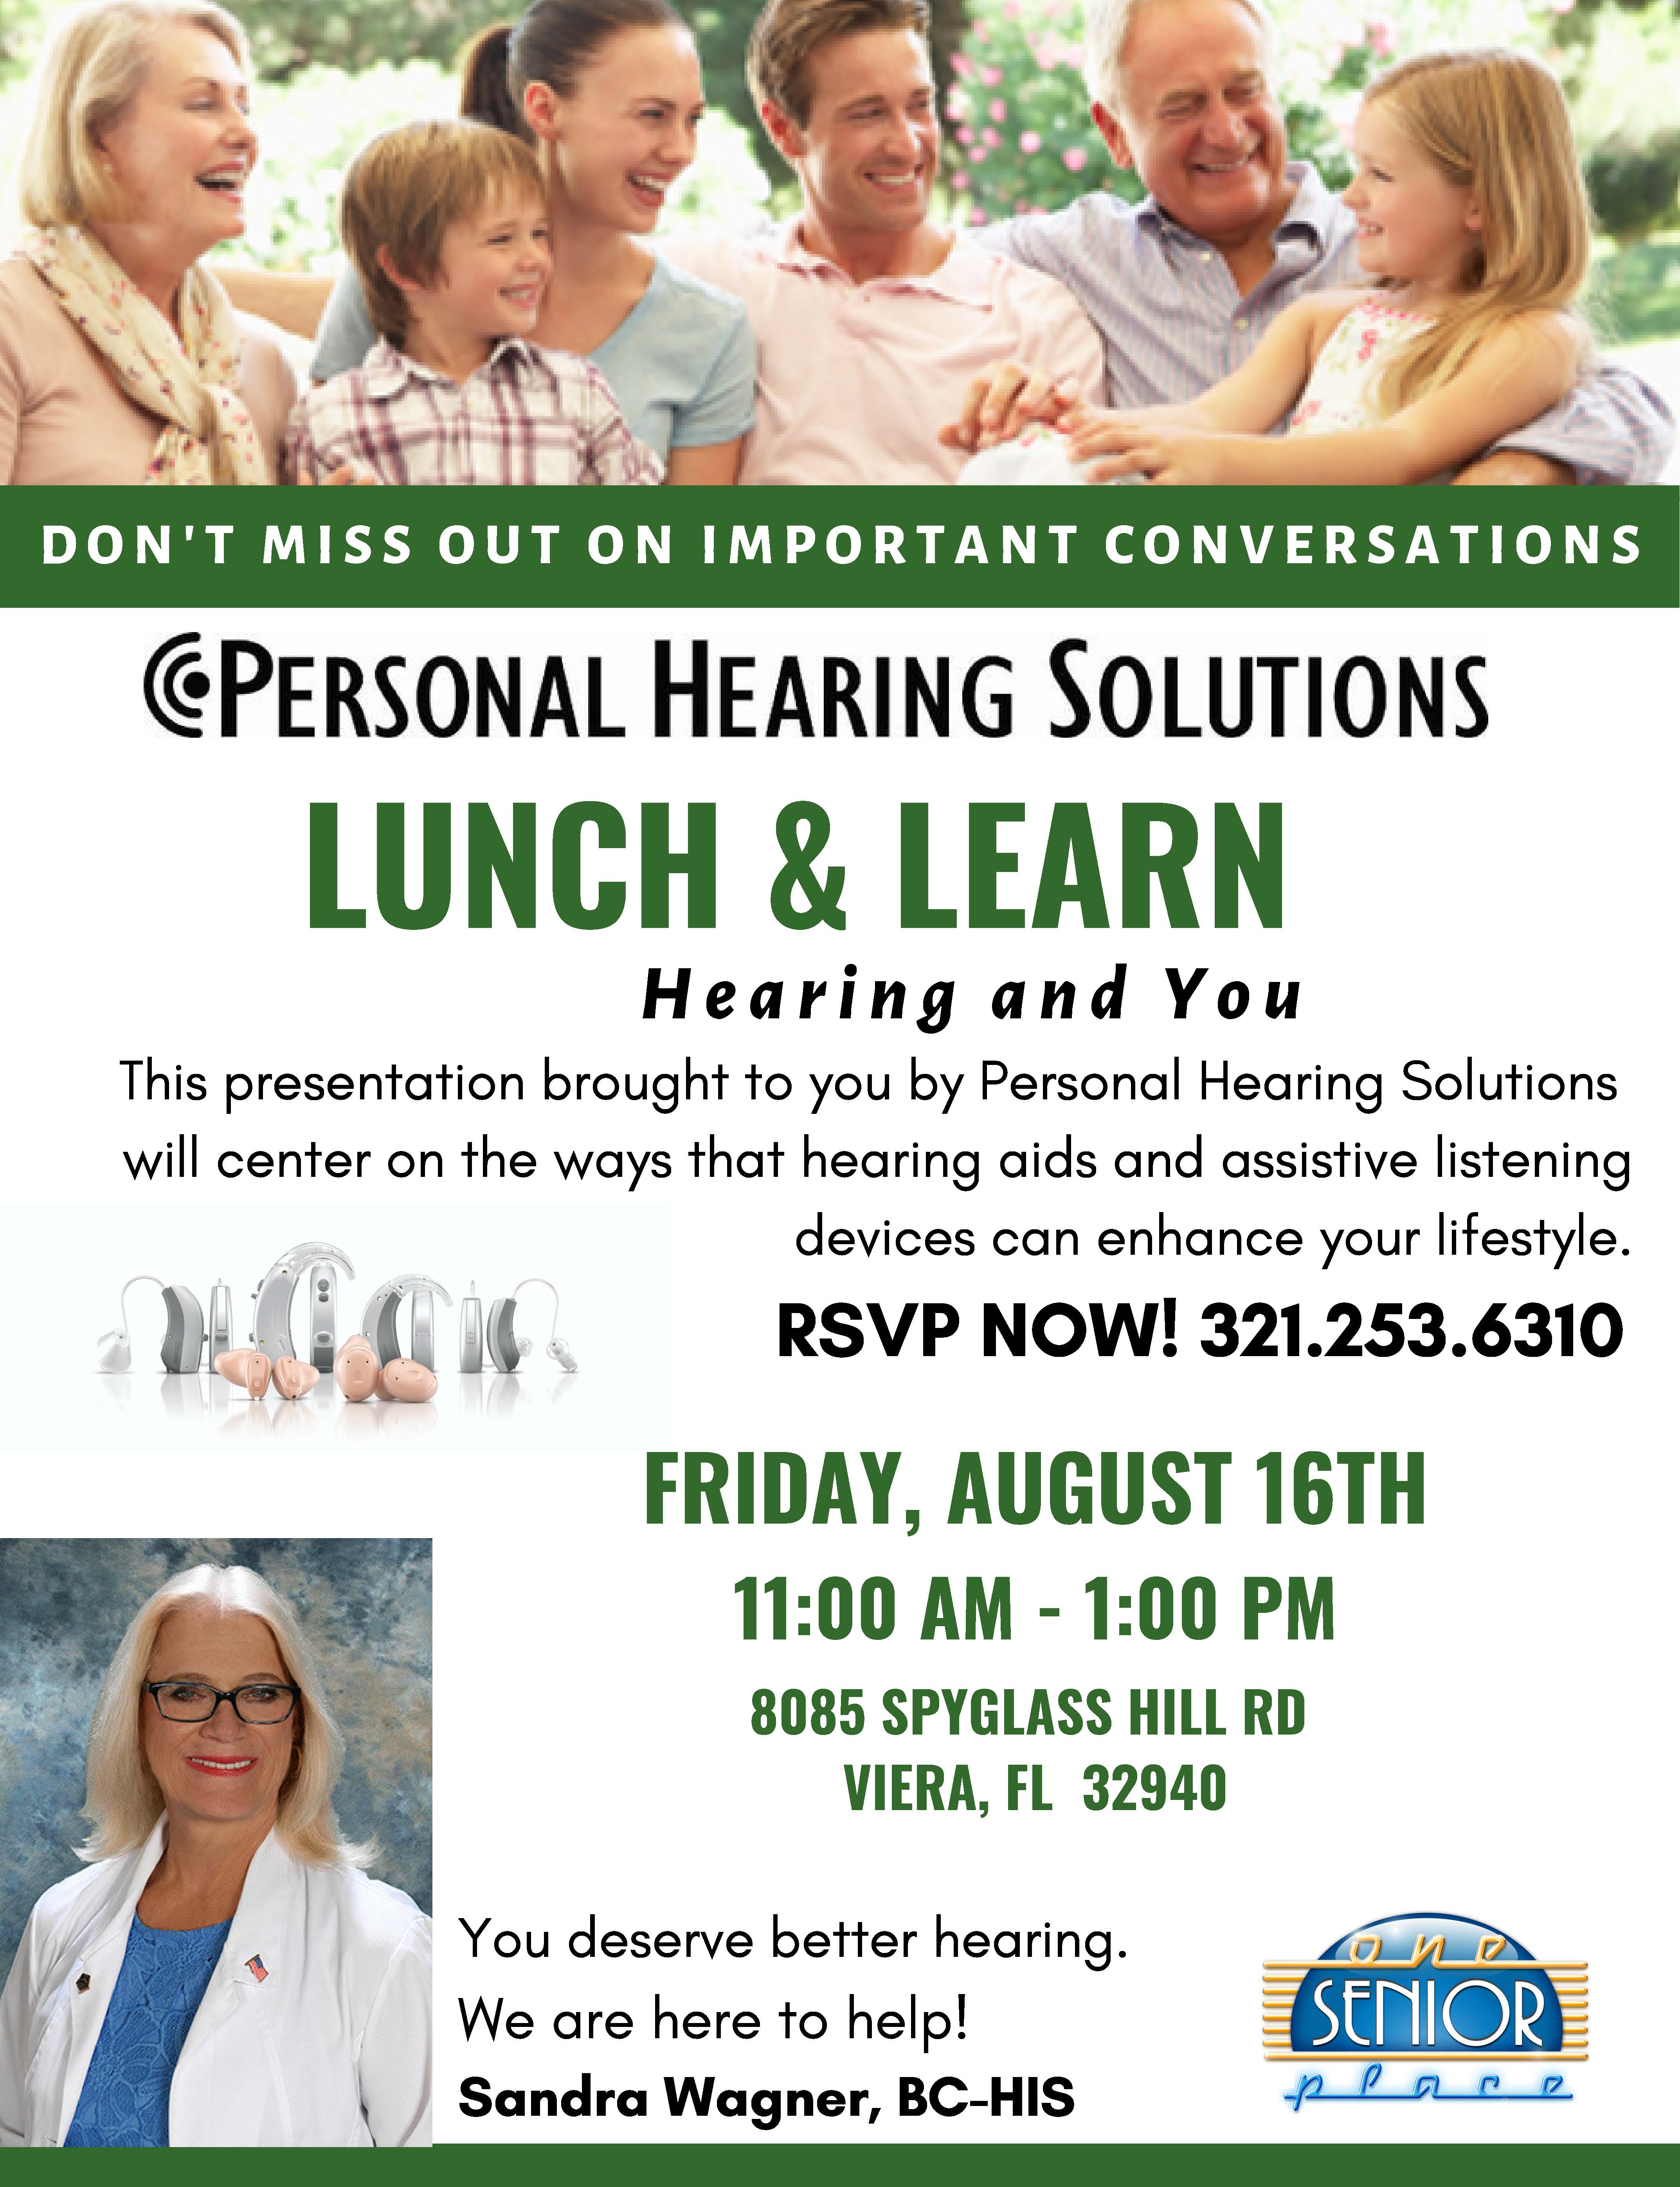 Hearing and You Lunch and Learn presented by Personal Hearing Solutions